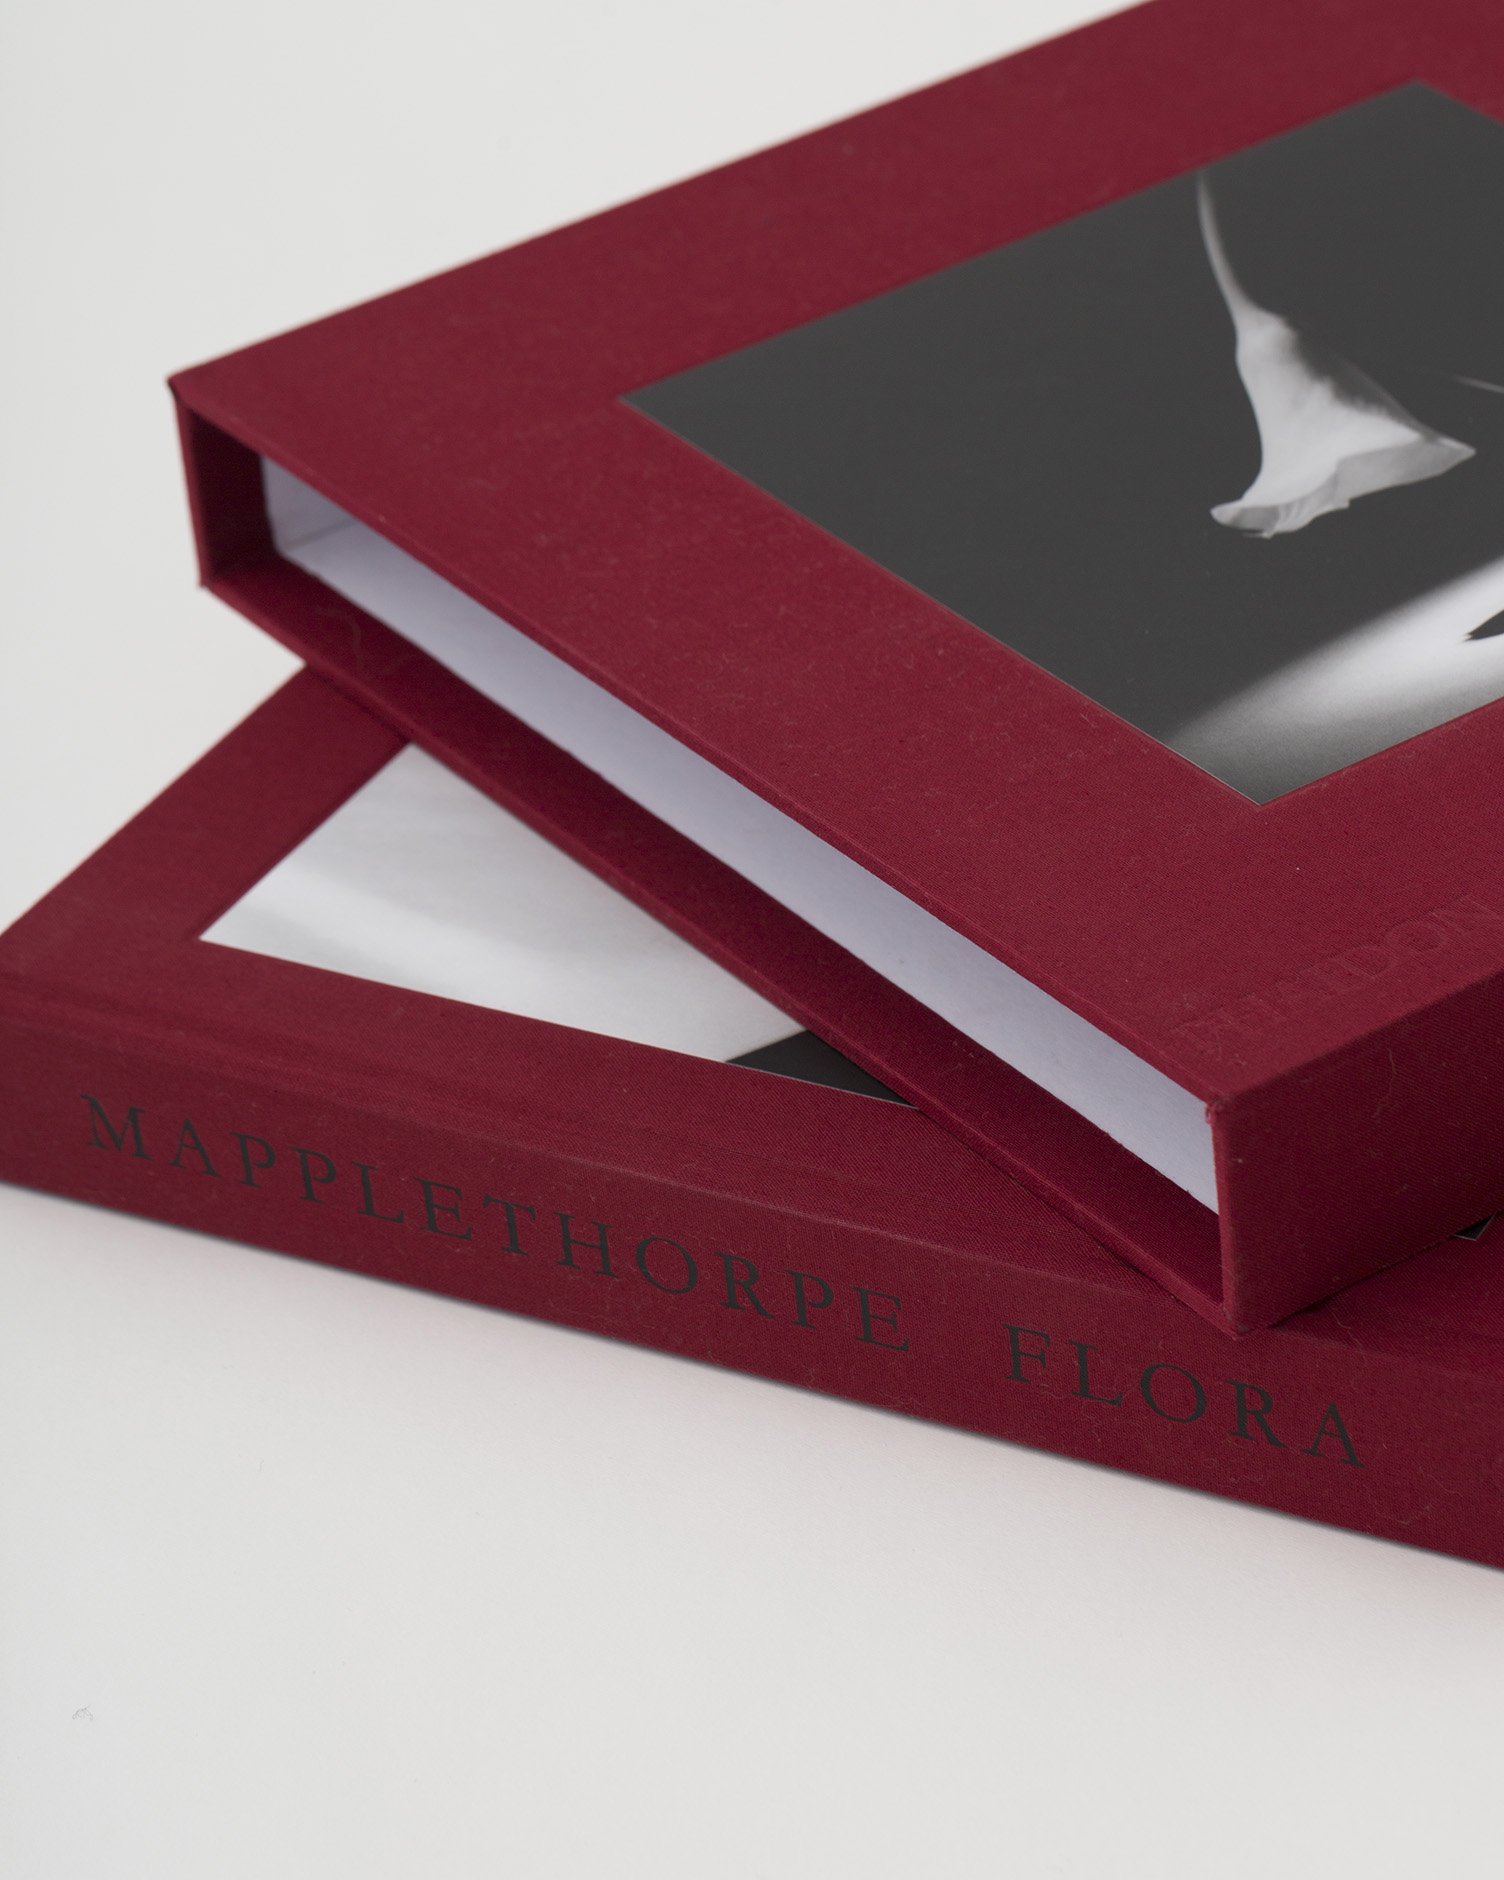 Robert Mapplethorpe The Complete Flowers - E store | 08book